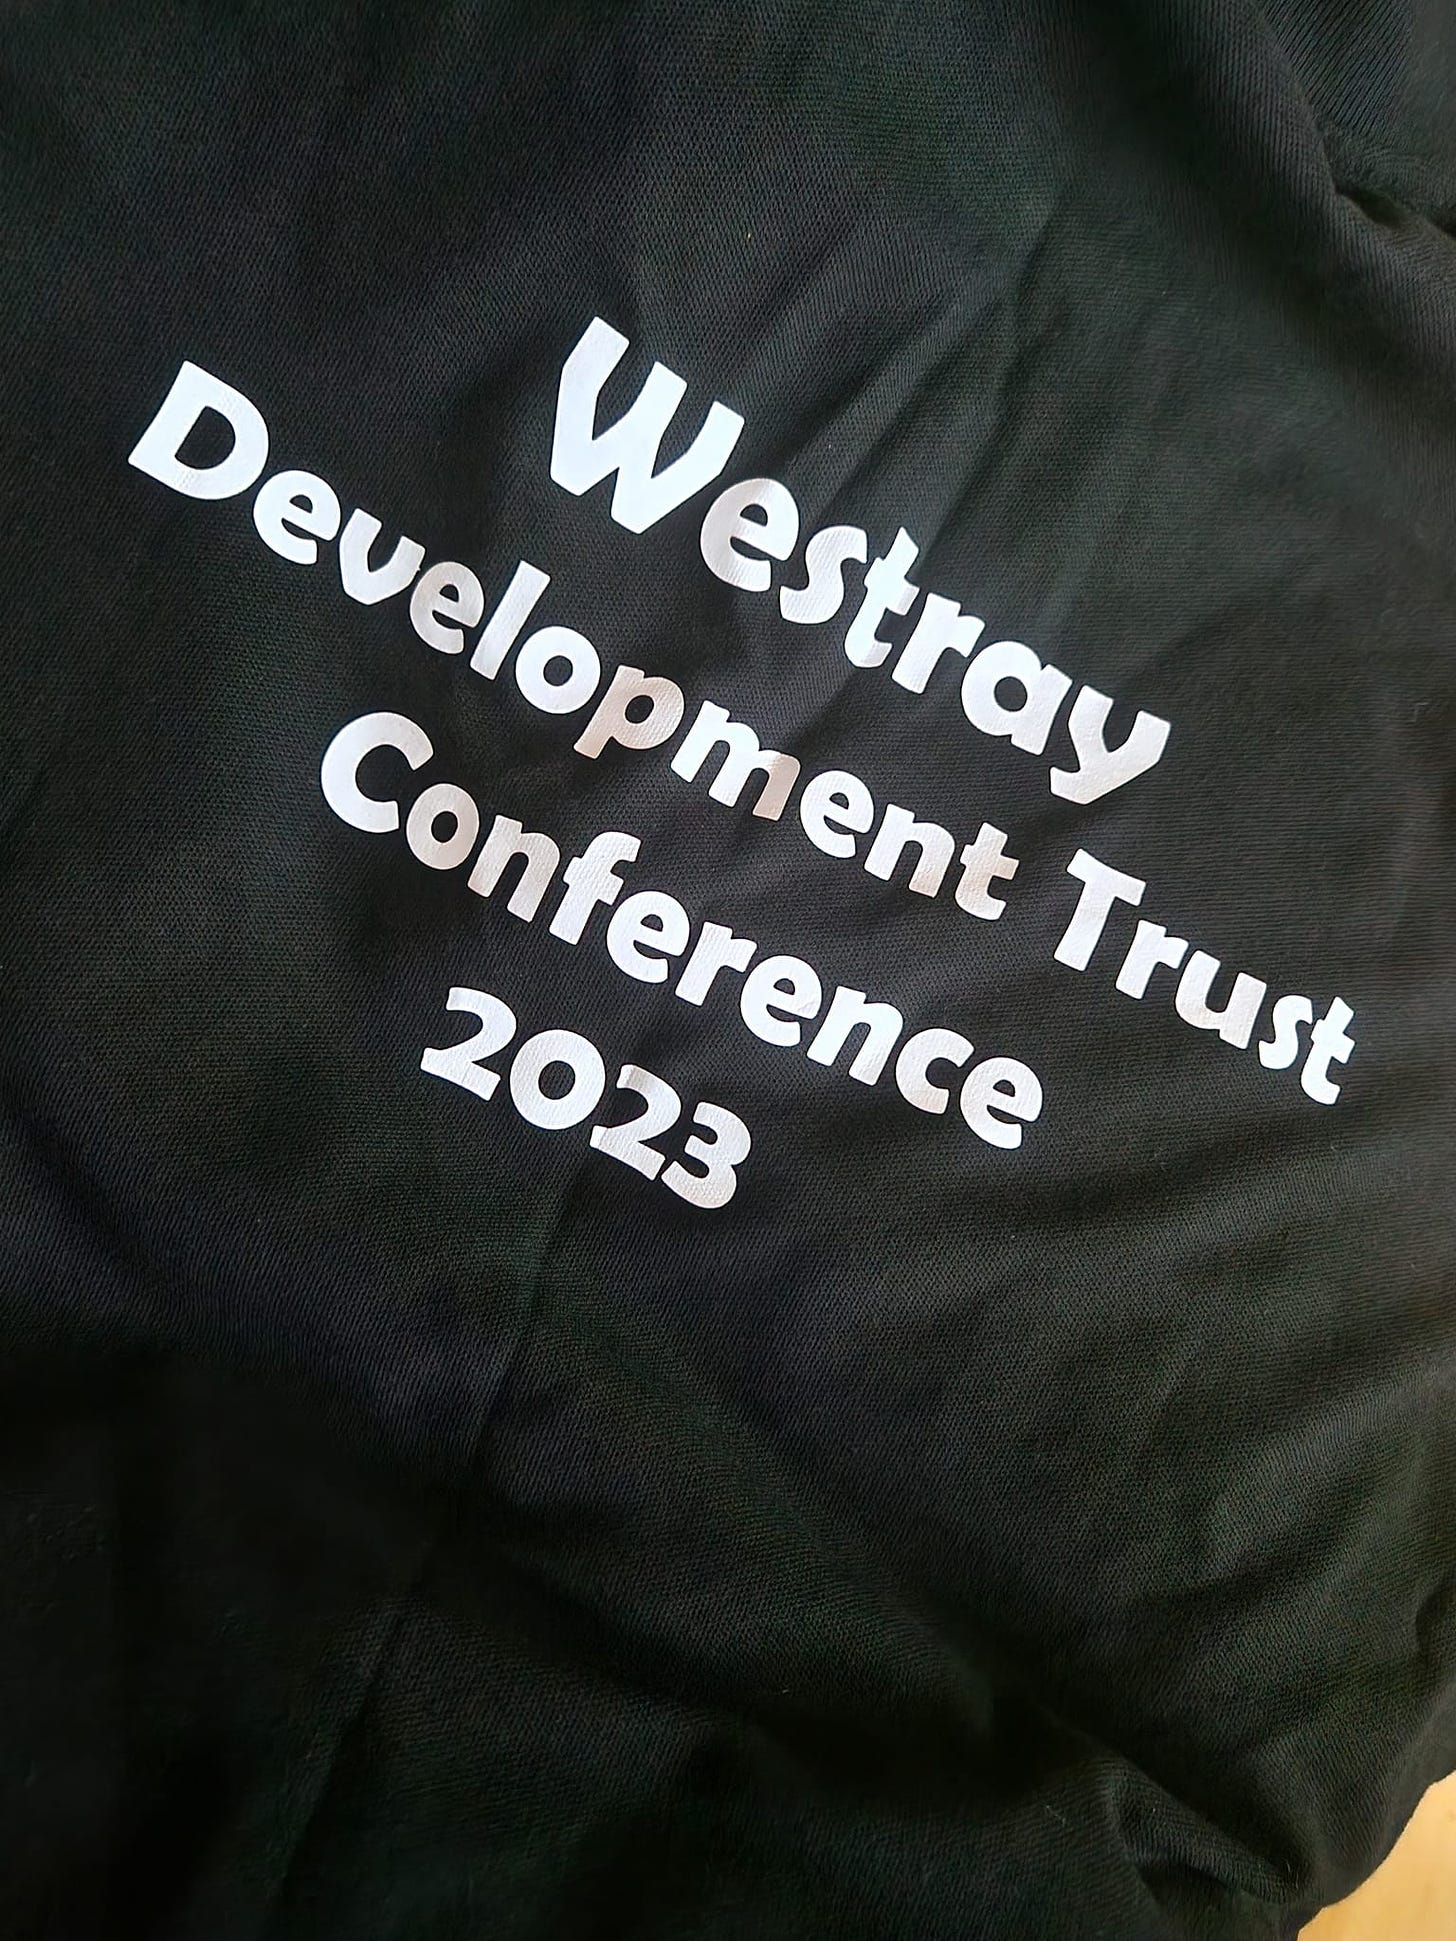 May be an image of text that says "Poolp Westray Conference Trust 2023"